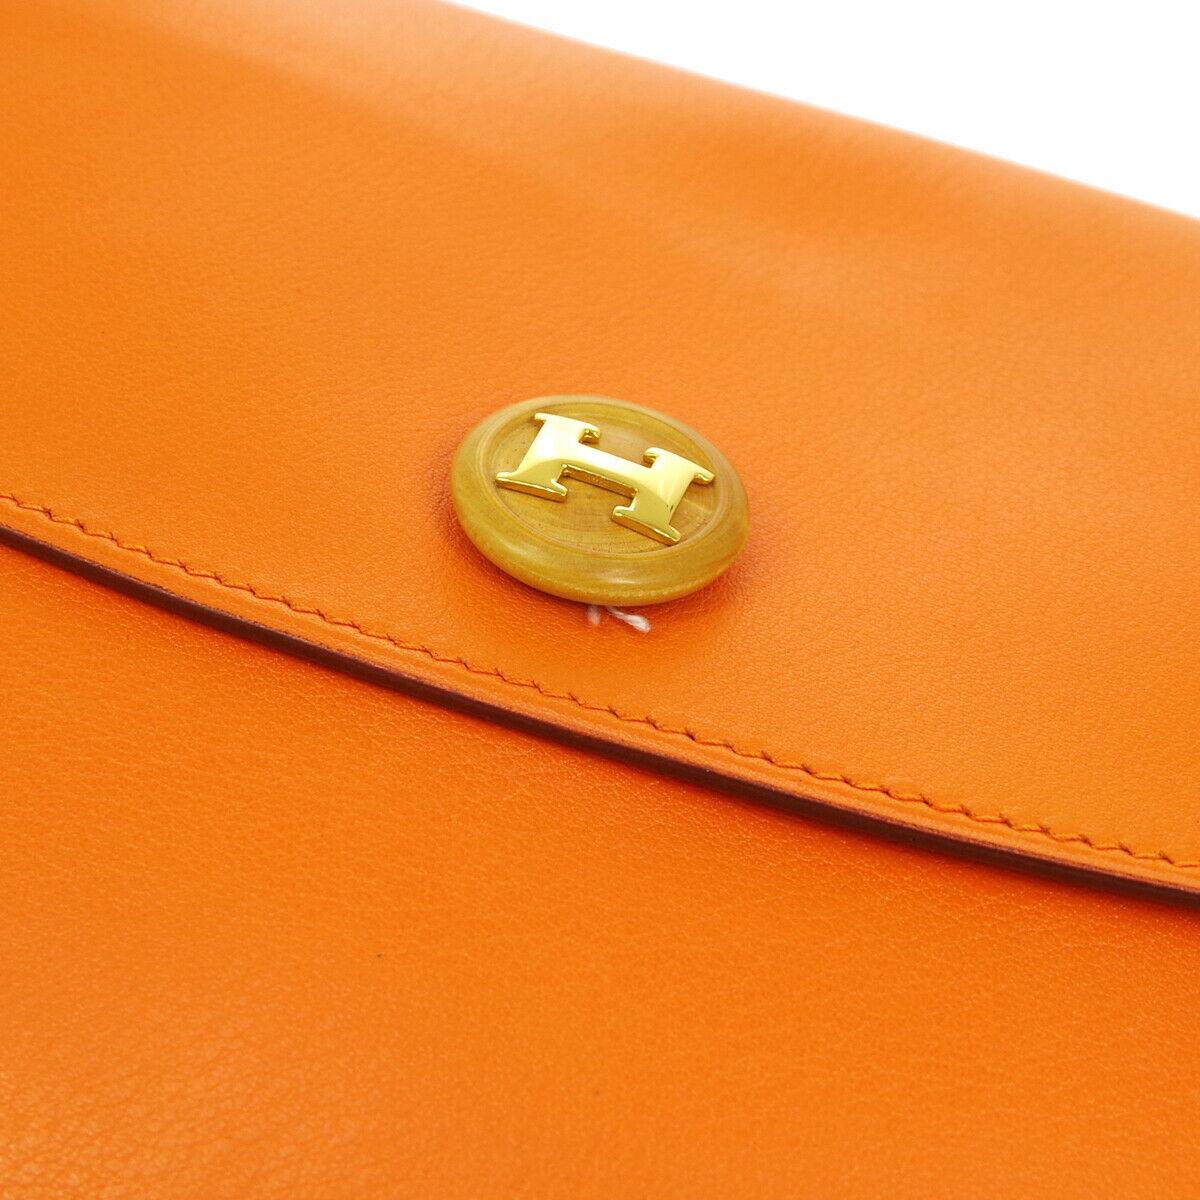 Leather
Wood
Gold tone hardware
Snap closure
Leather lining
Date code present
Made in France
Measures 9.5